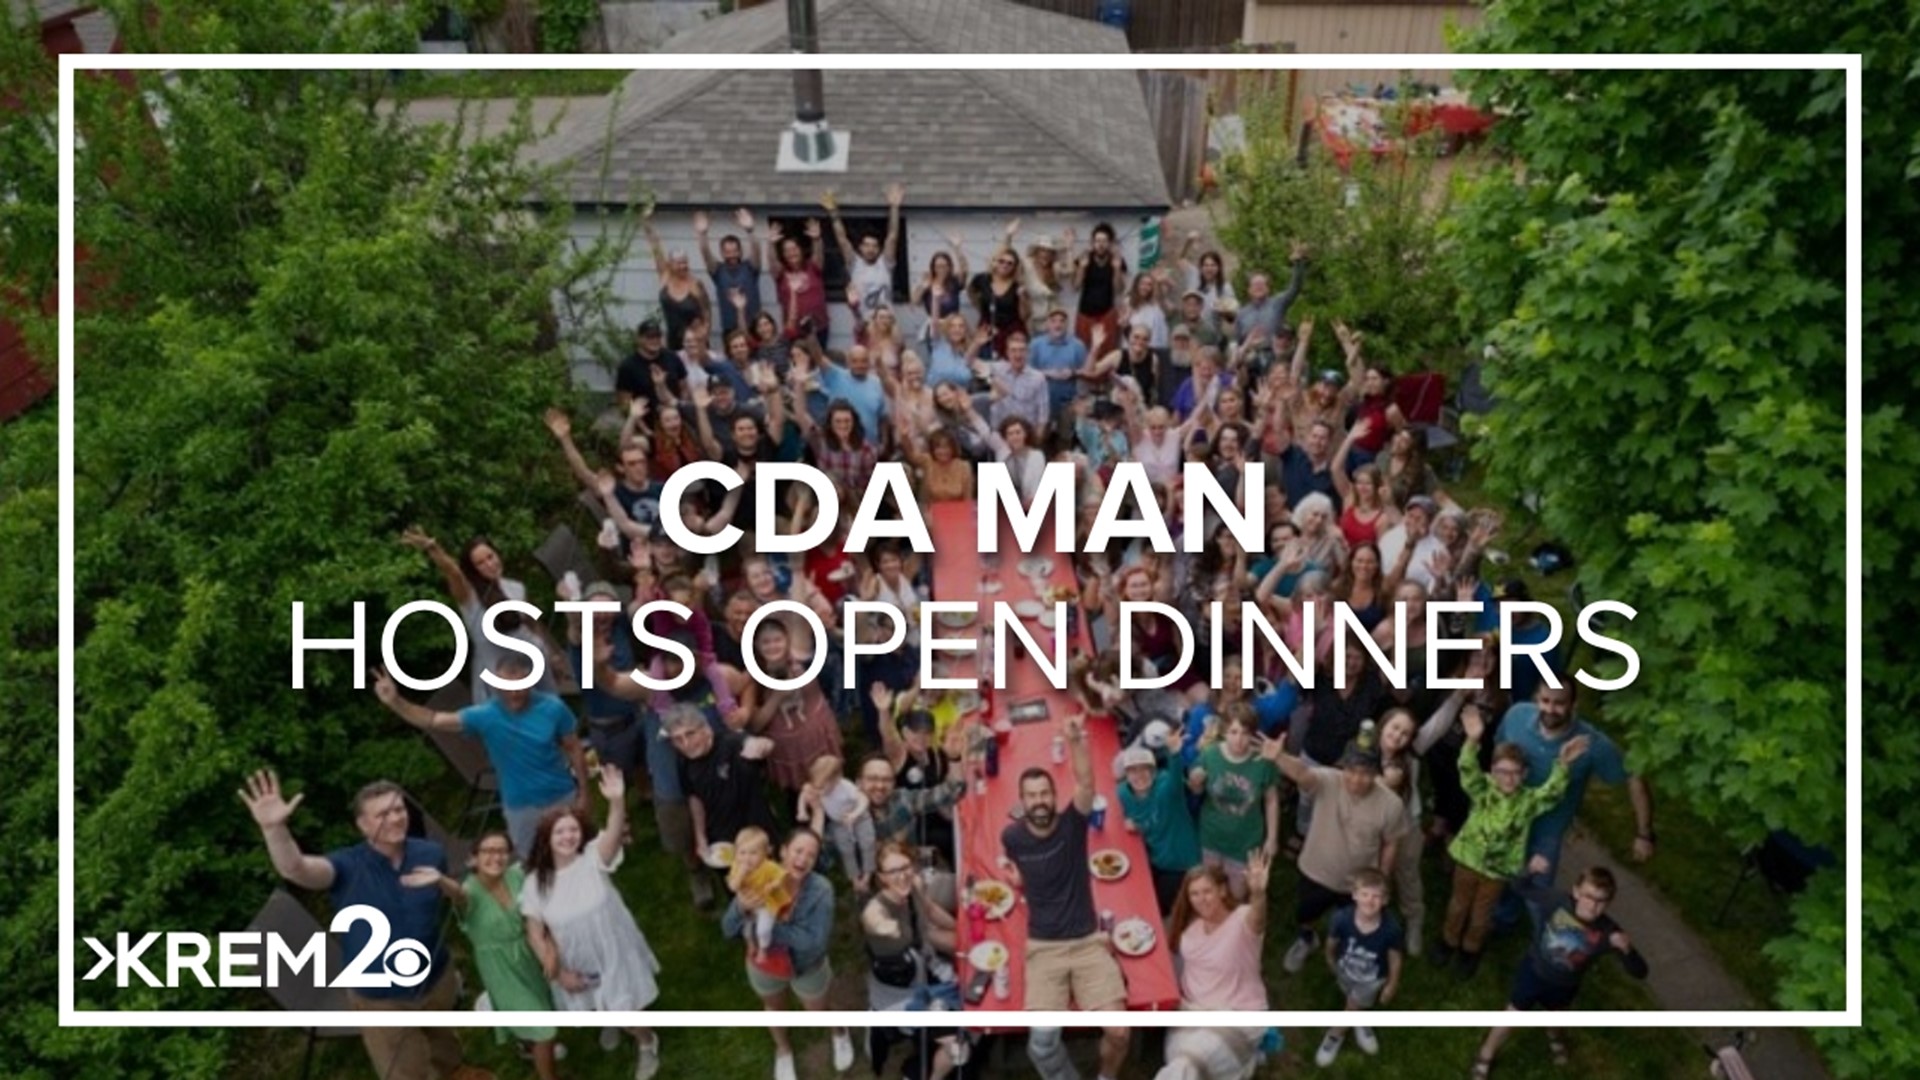 The dinners have grown to 200 people at times and many of the strangers Adam Schulter invites have become lifelong friends.